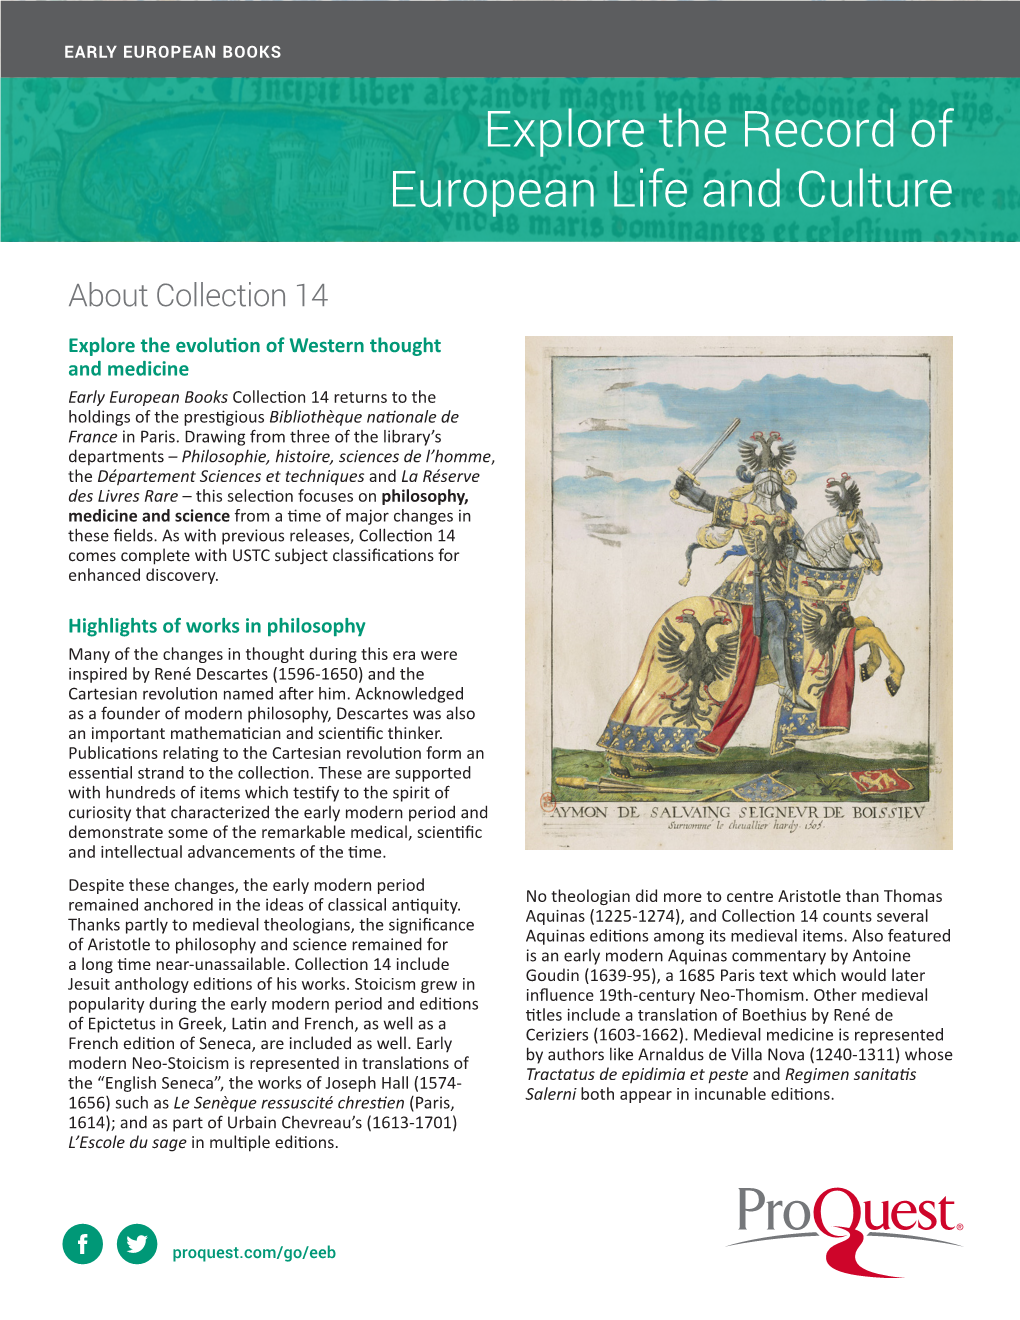 Explore the Record of European Life and Culture